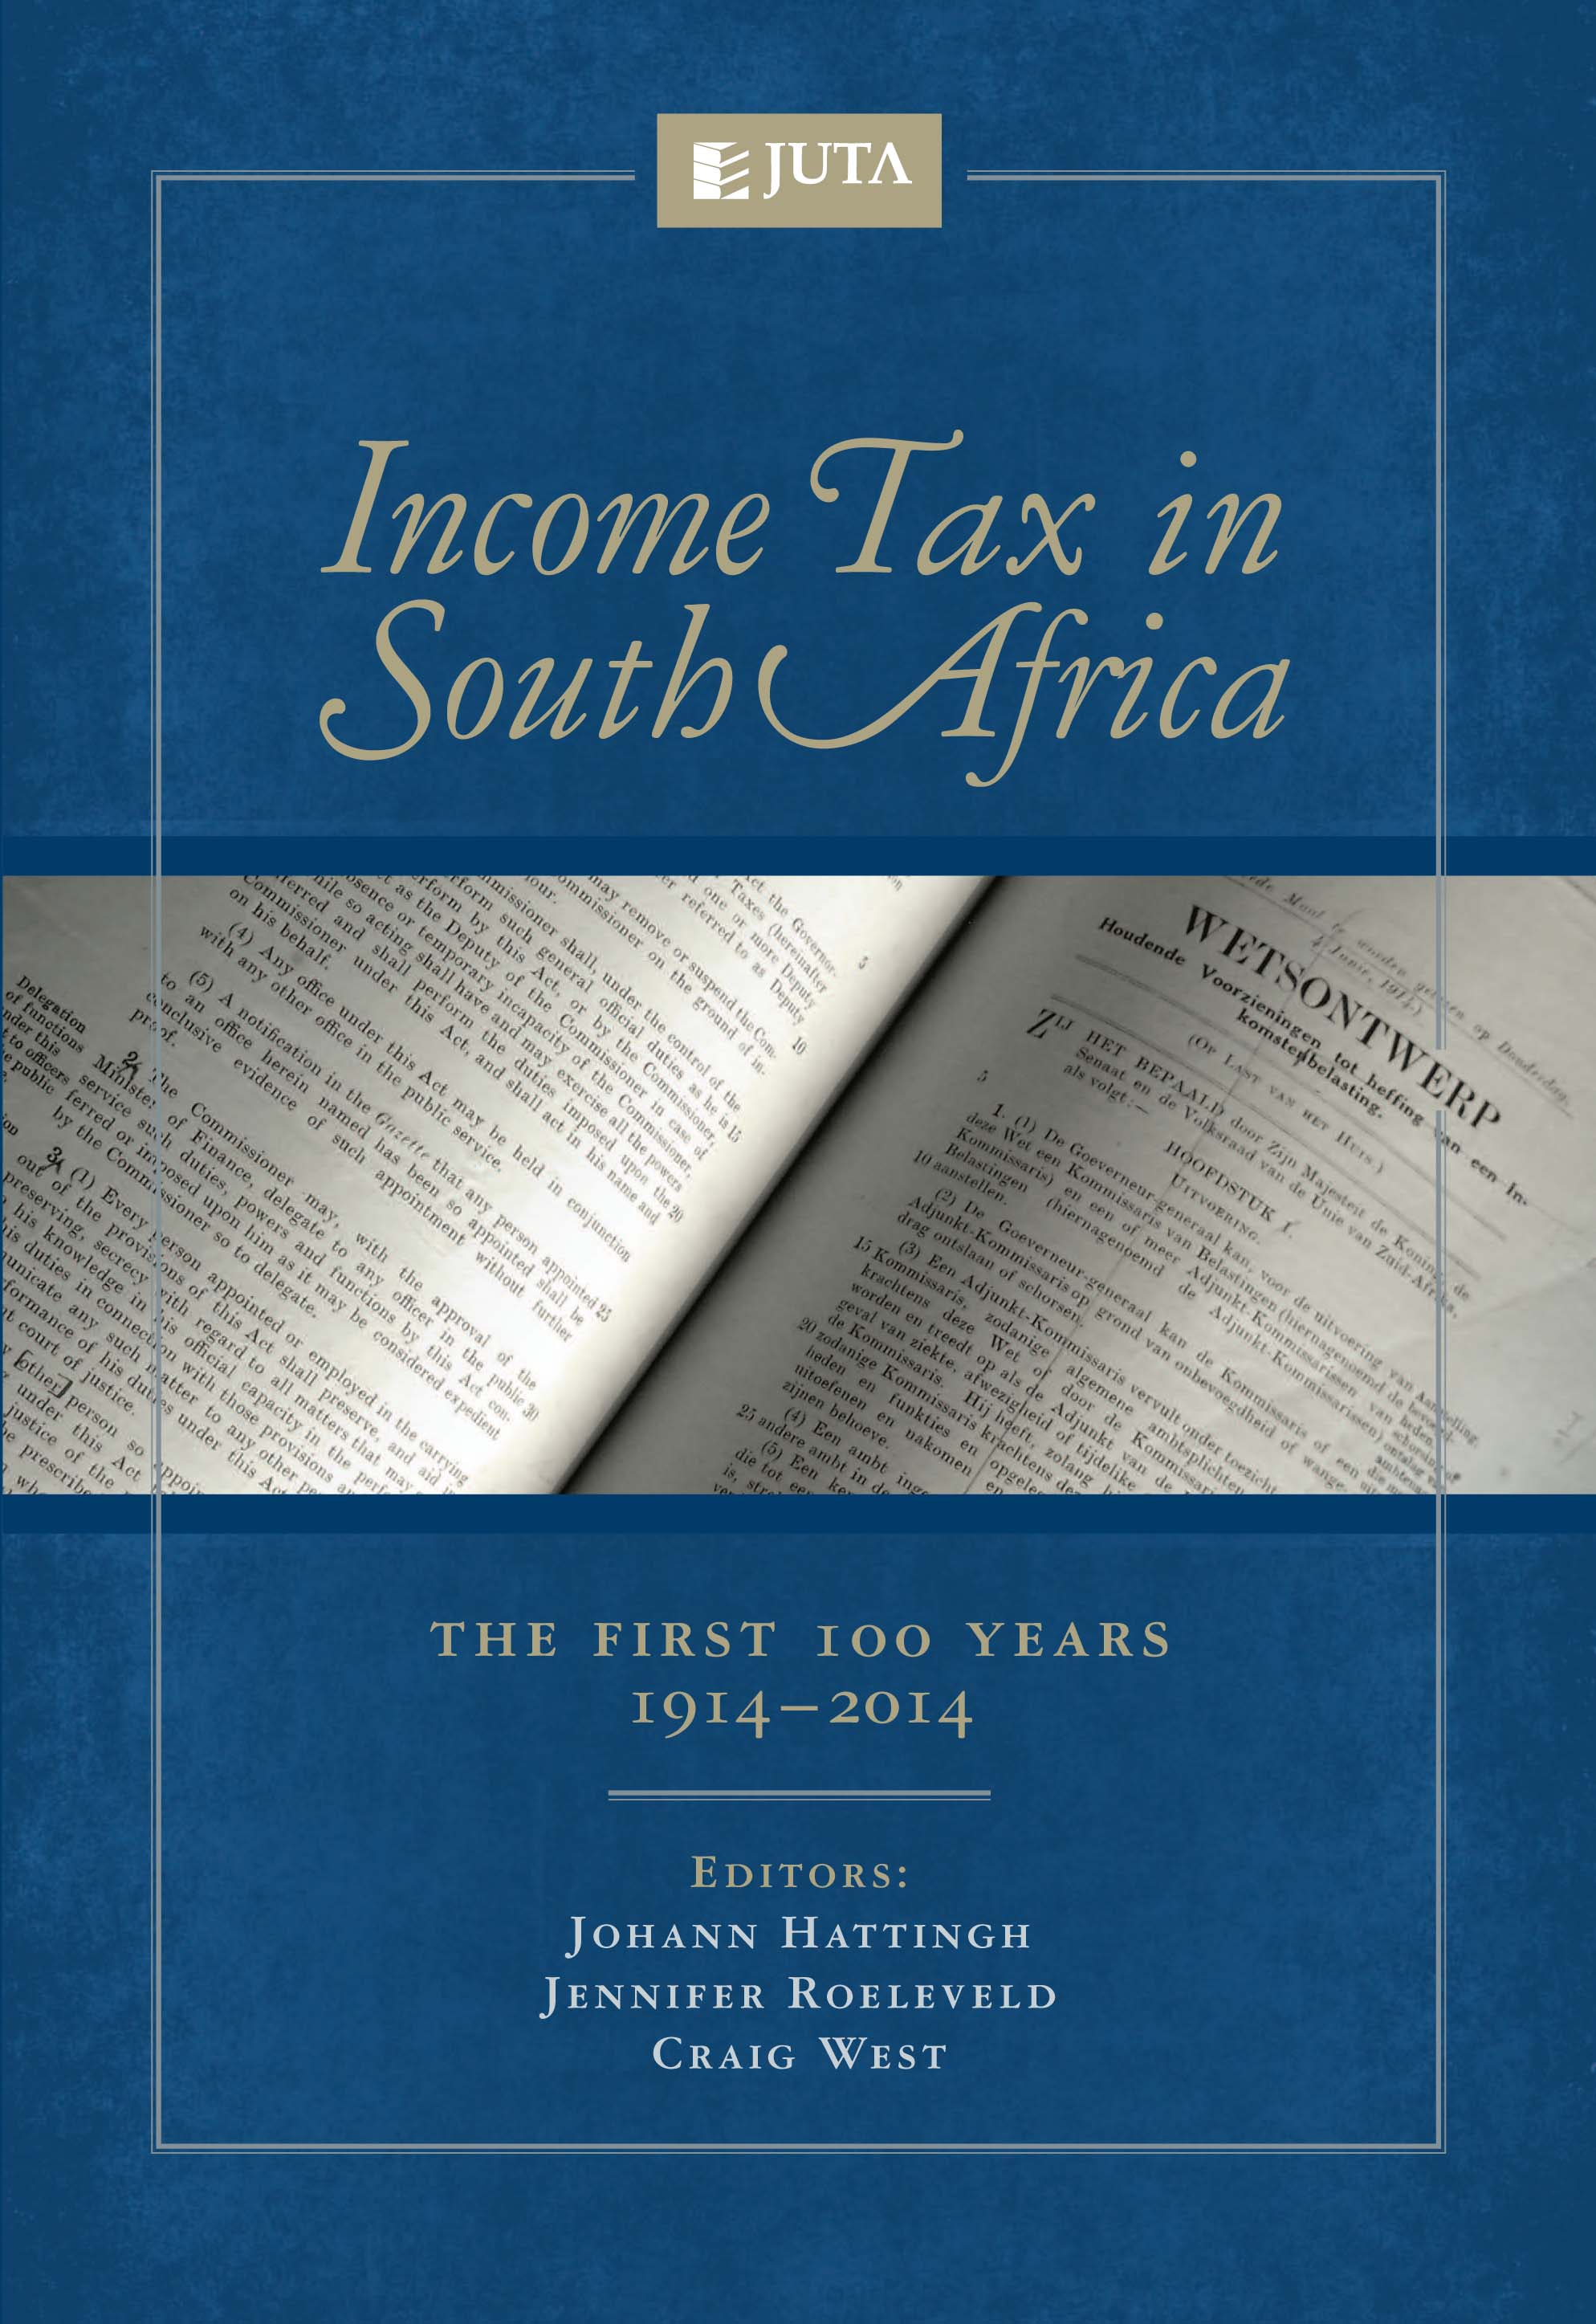 Income Tax in South Africa: The first 100 years 1914 - 2014